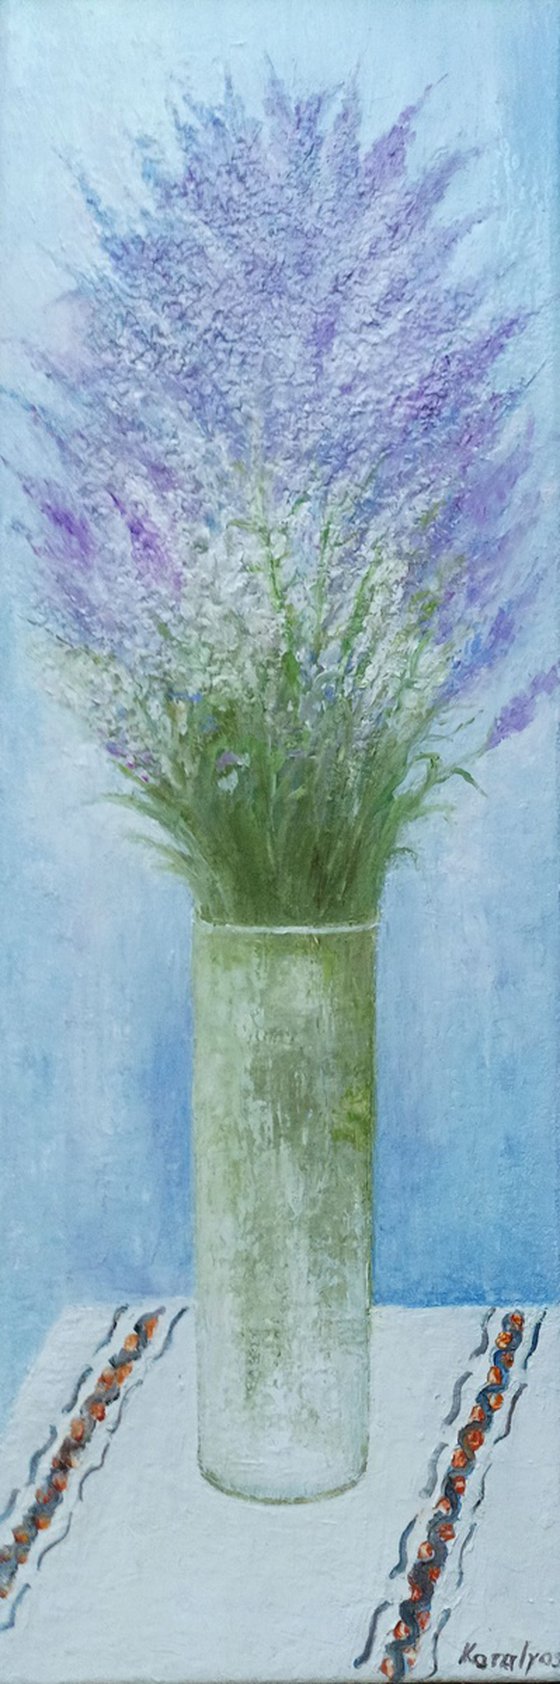 Still life with lavender flowers